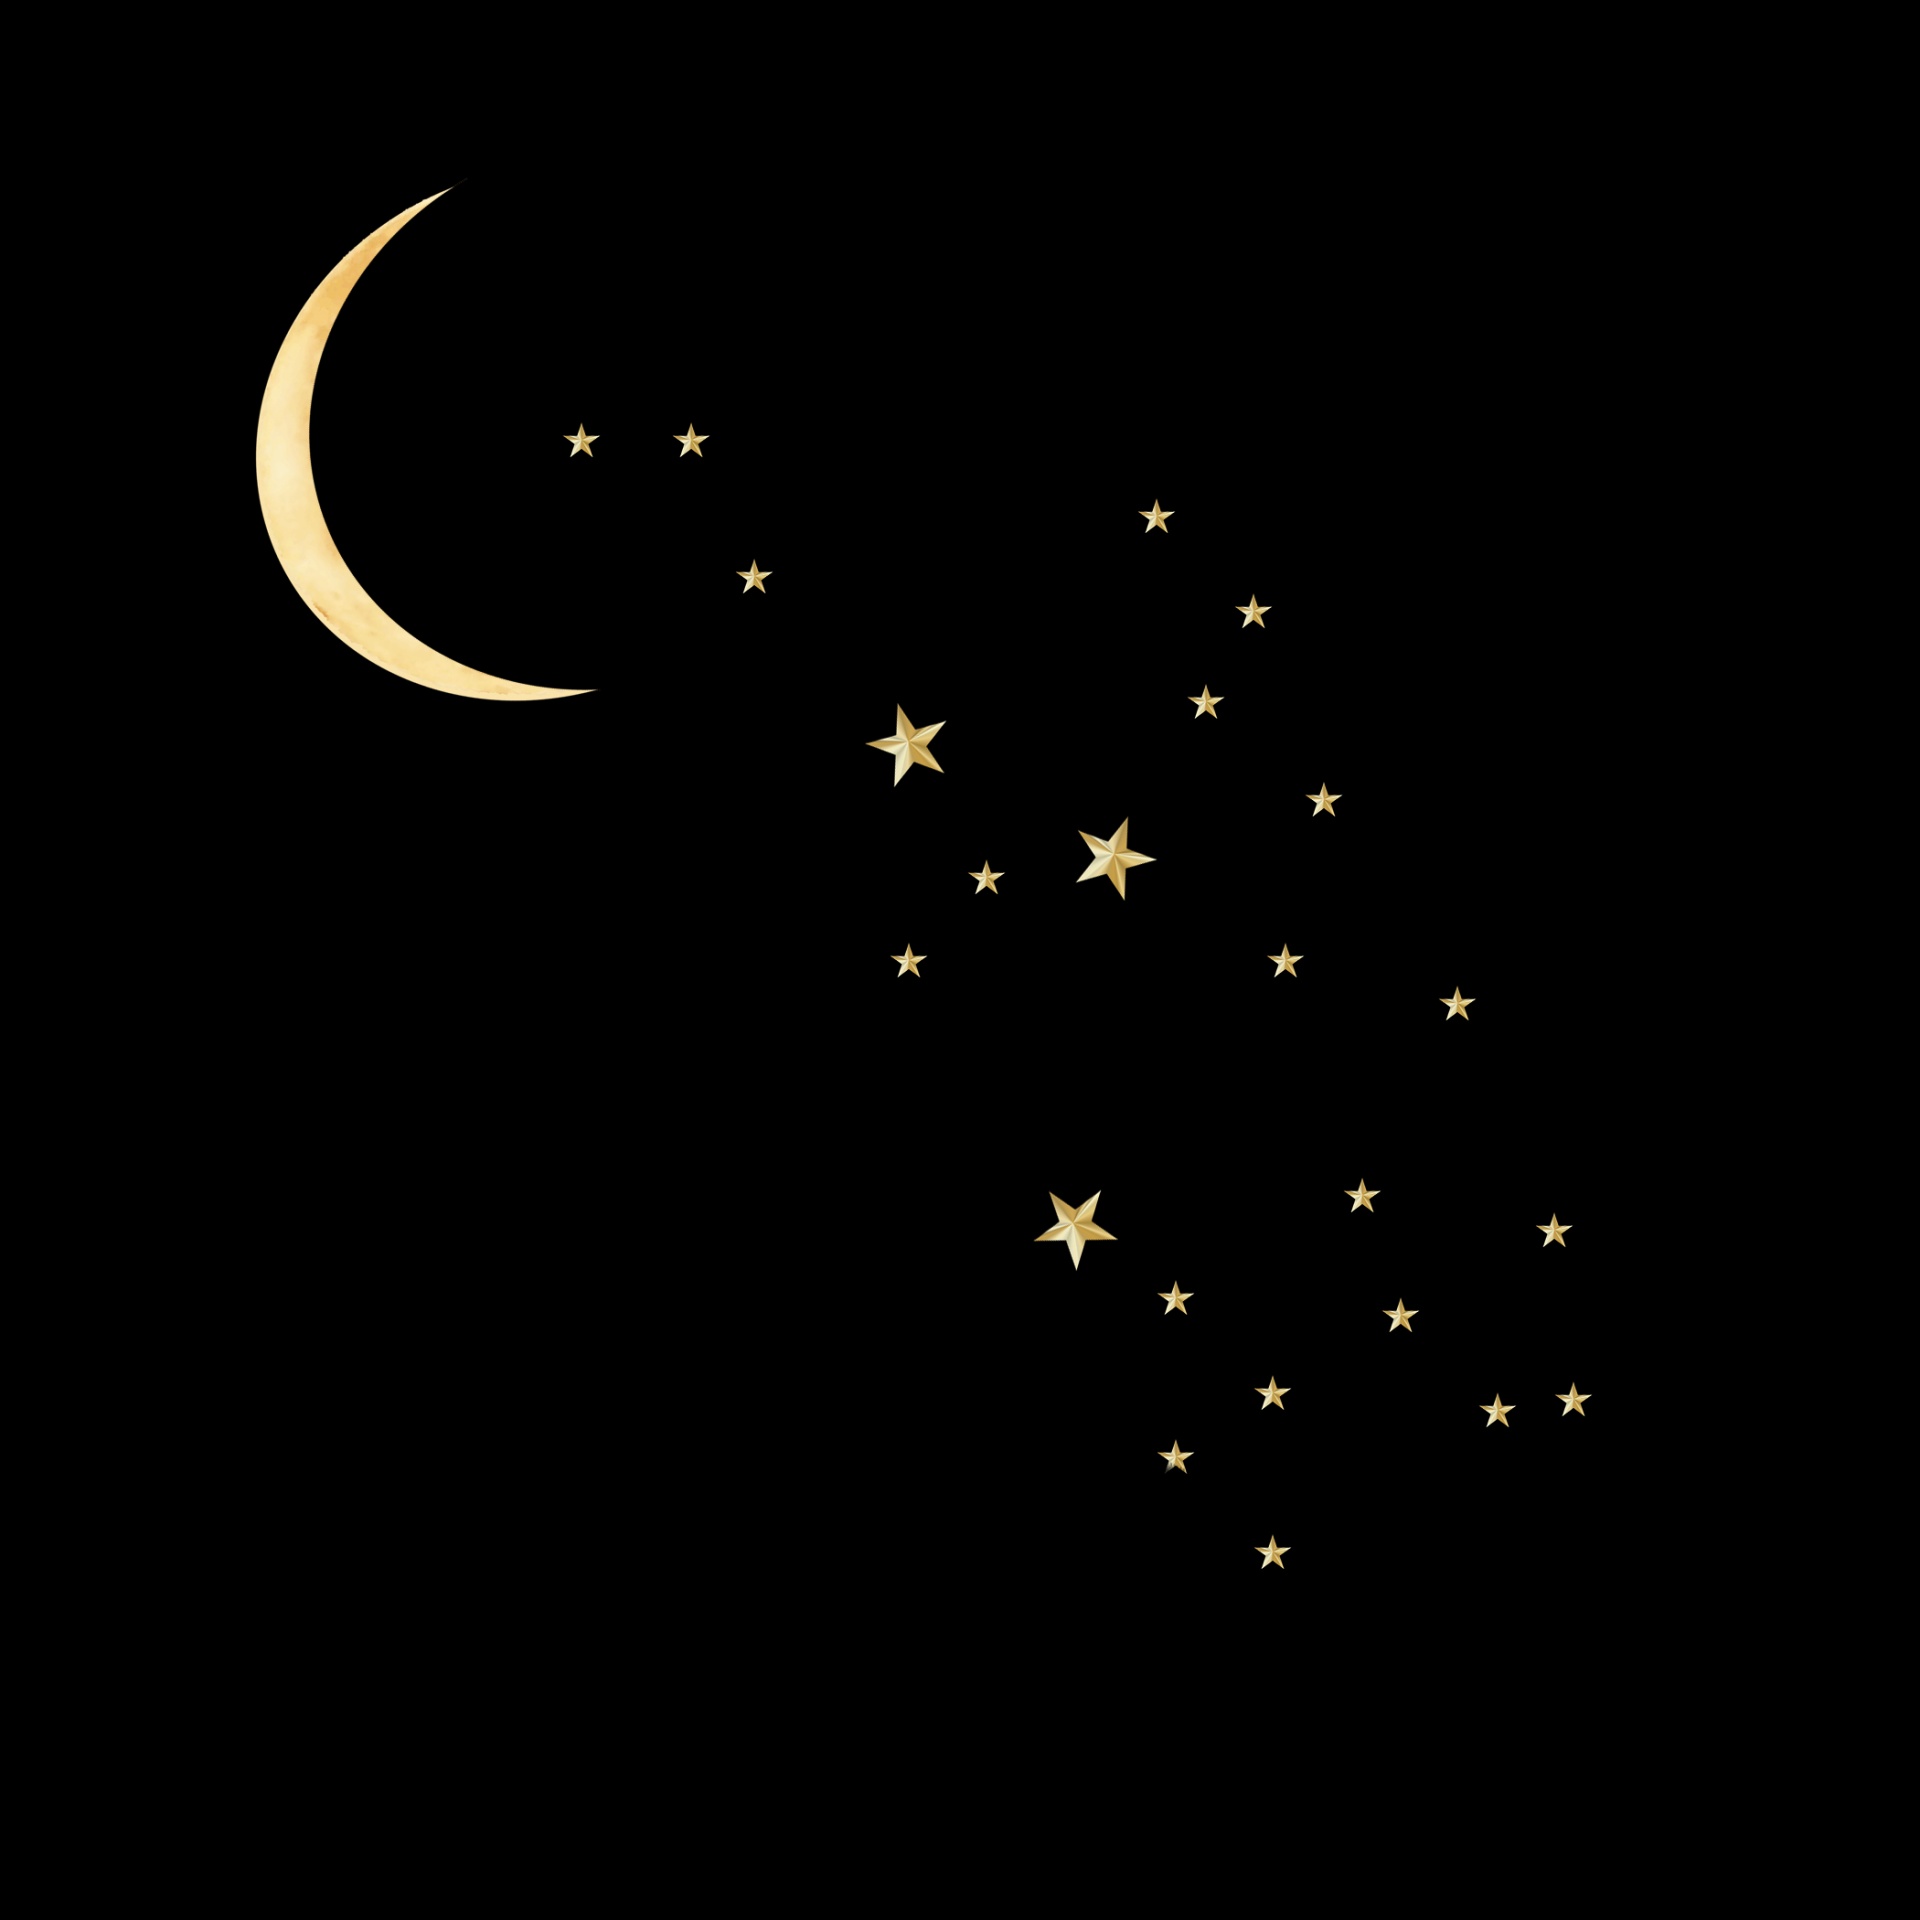 Crescent moon and stars for Halloween or other greeting